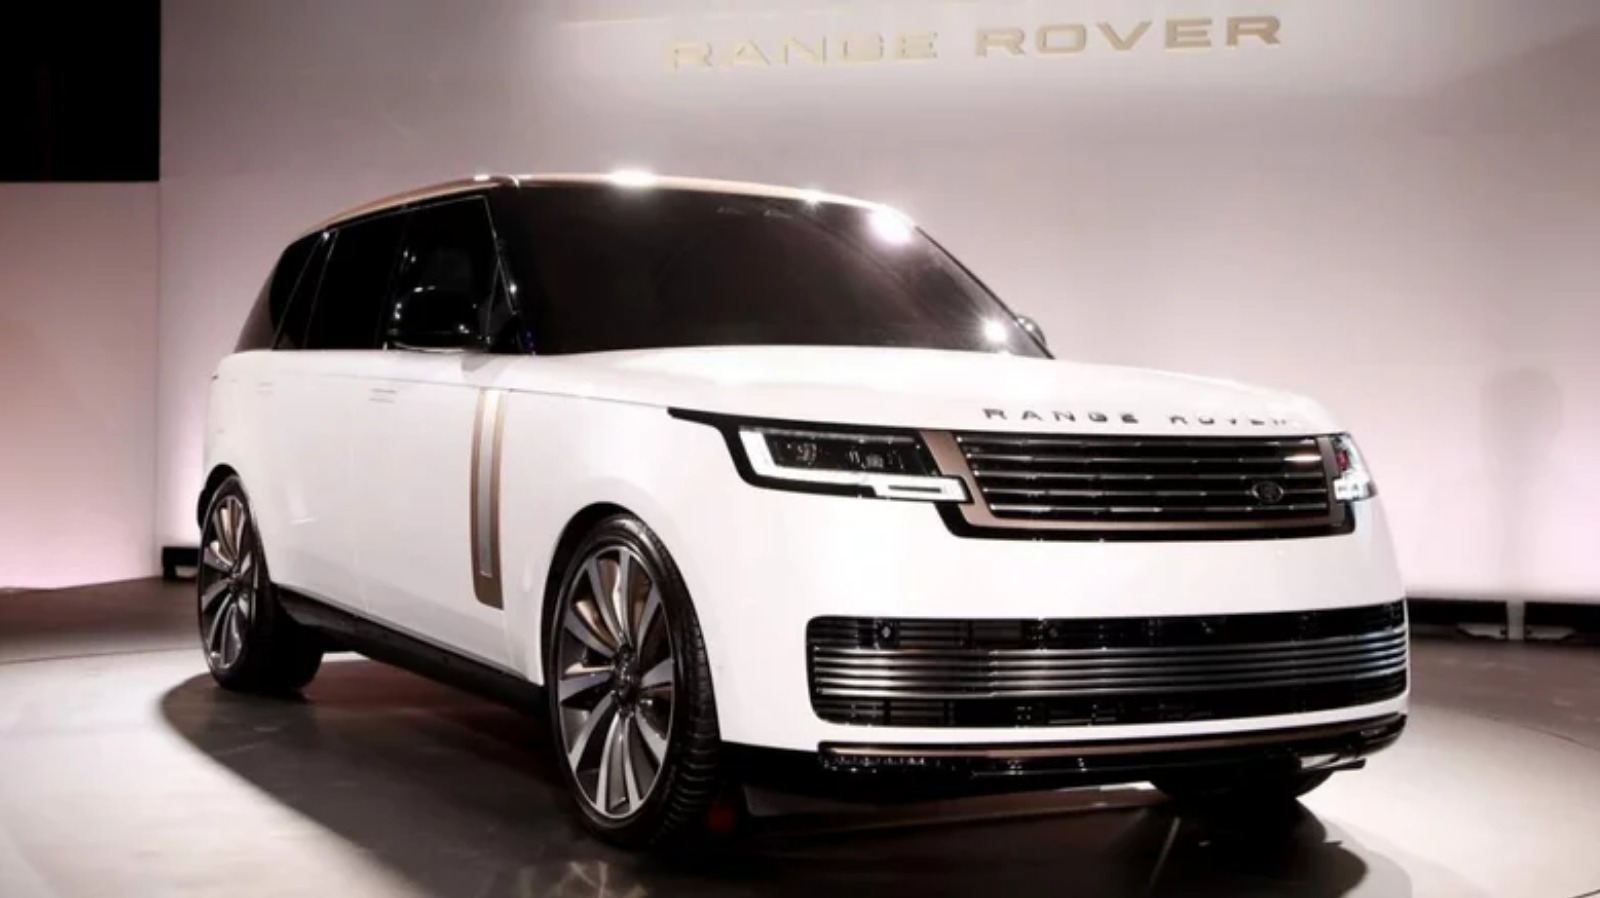 10 Best Features Of The 2022 Land Rover Range Rover